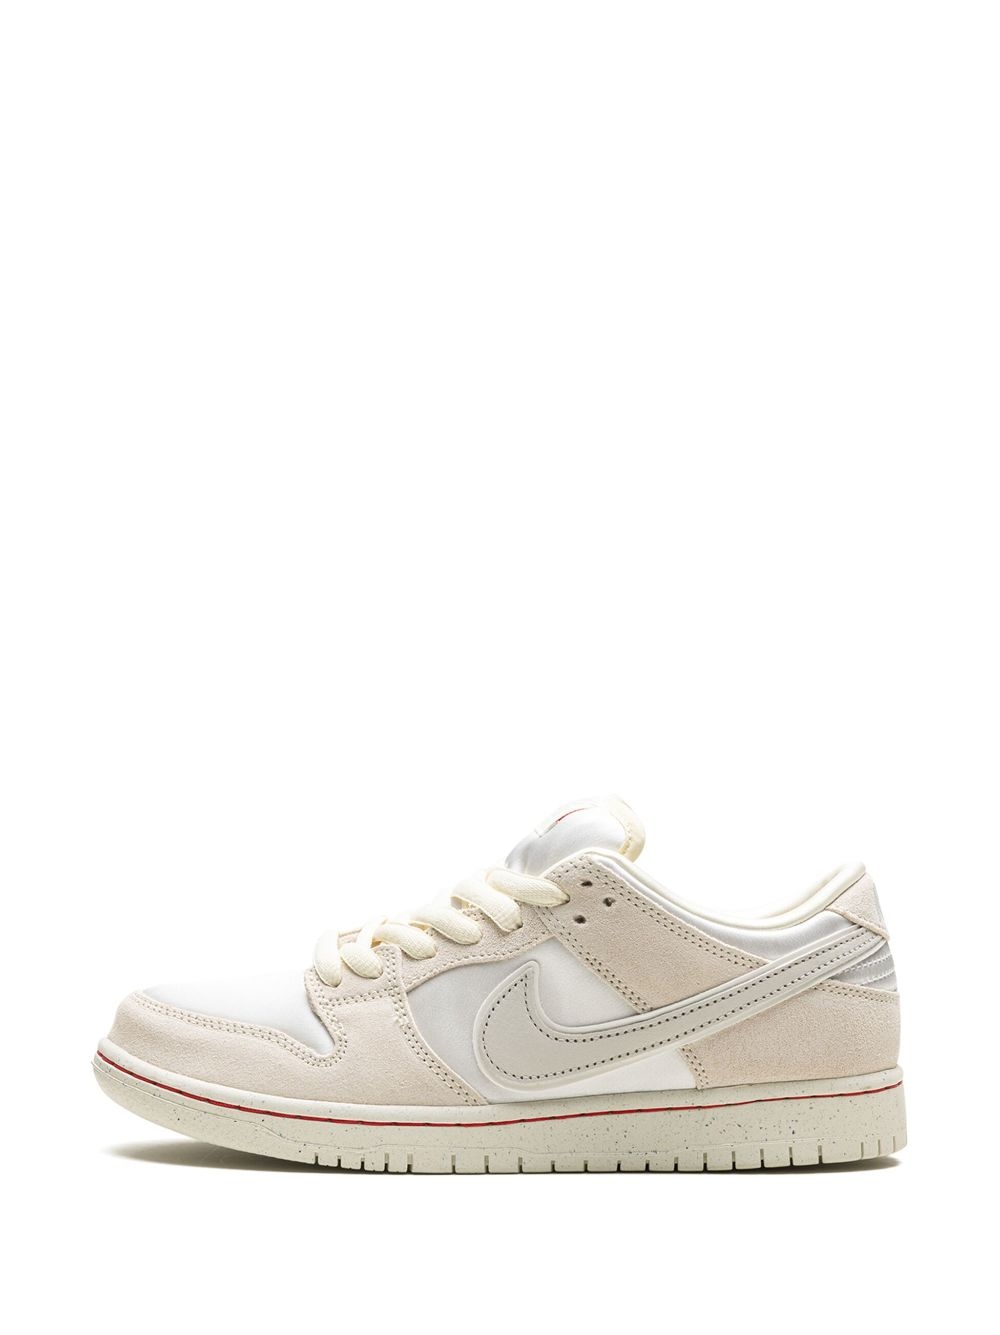 SB Dunk Low "Valentine's Day - Low Love Found" sneakers - 6